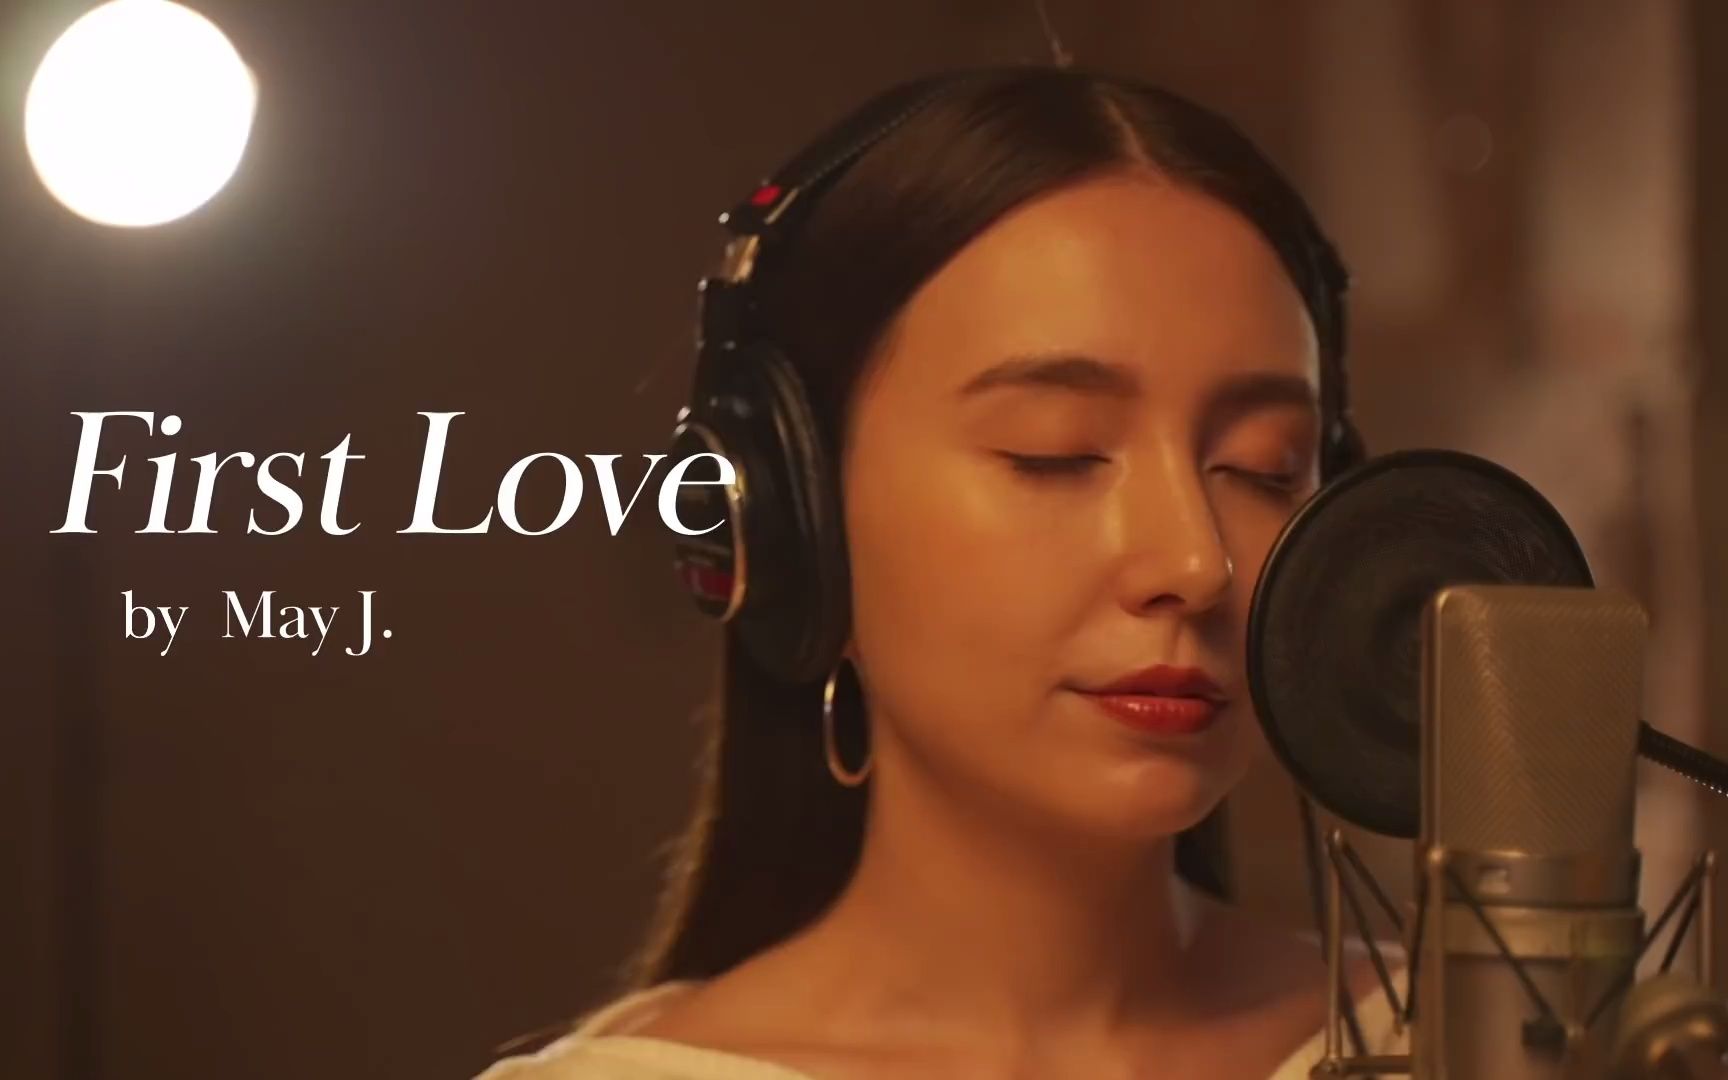 First Love / 宇多田ヒカル covered by May J. 1080p